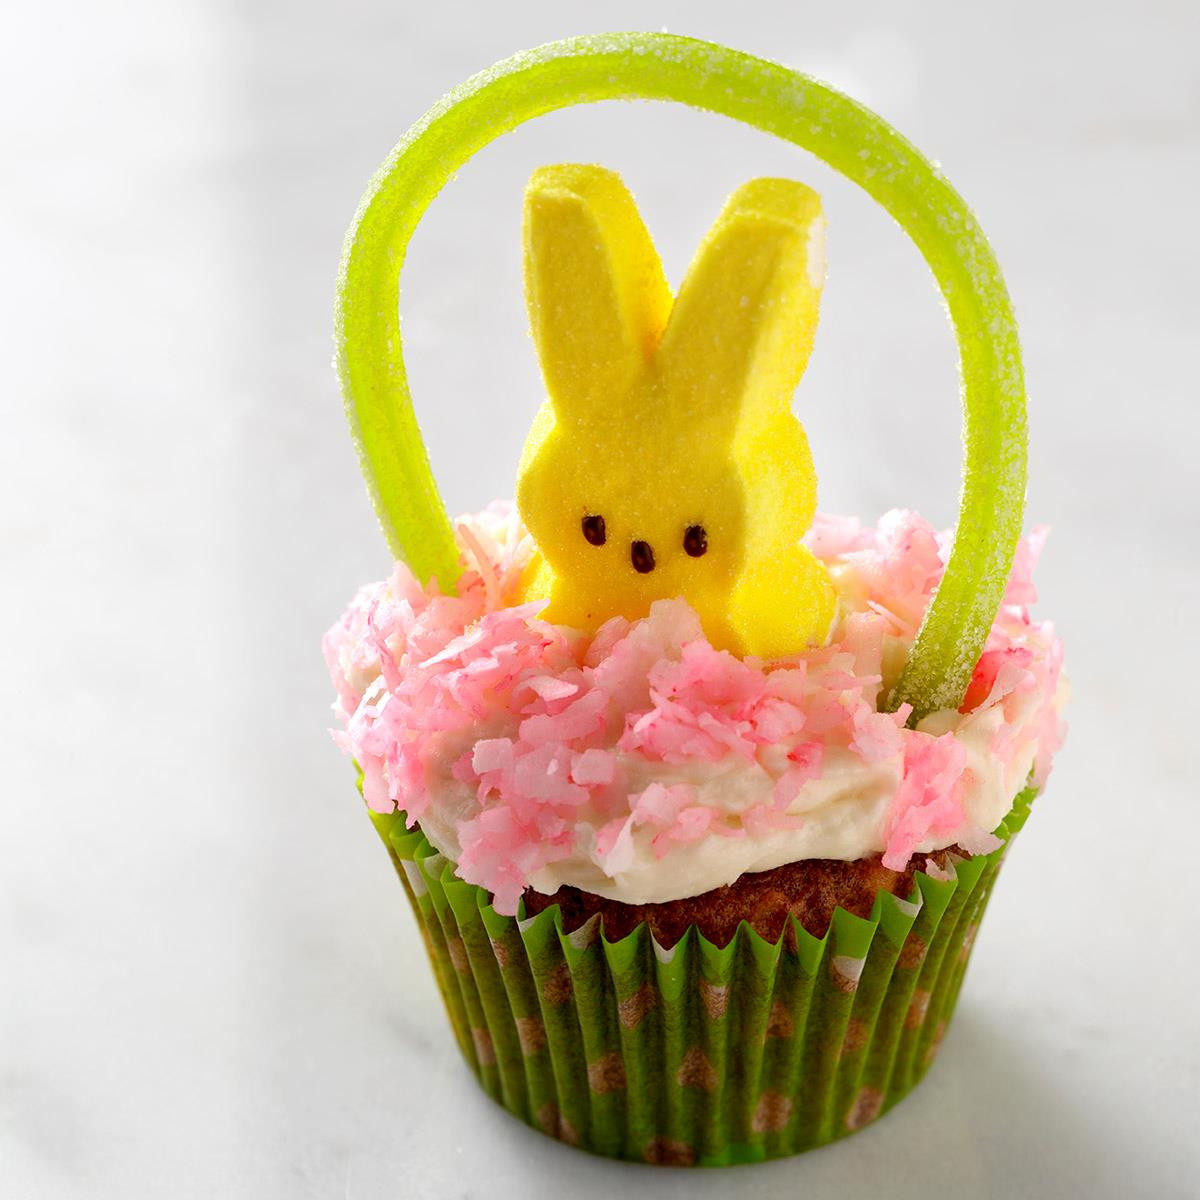 Cupcakes For Easter
 Easter Basket Cupcakes Recipe